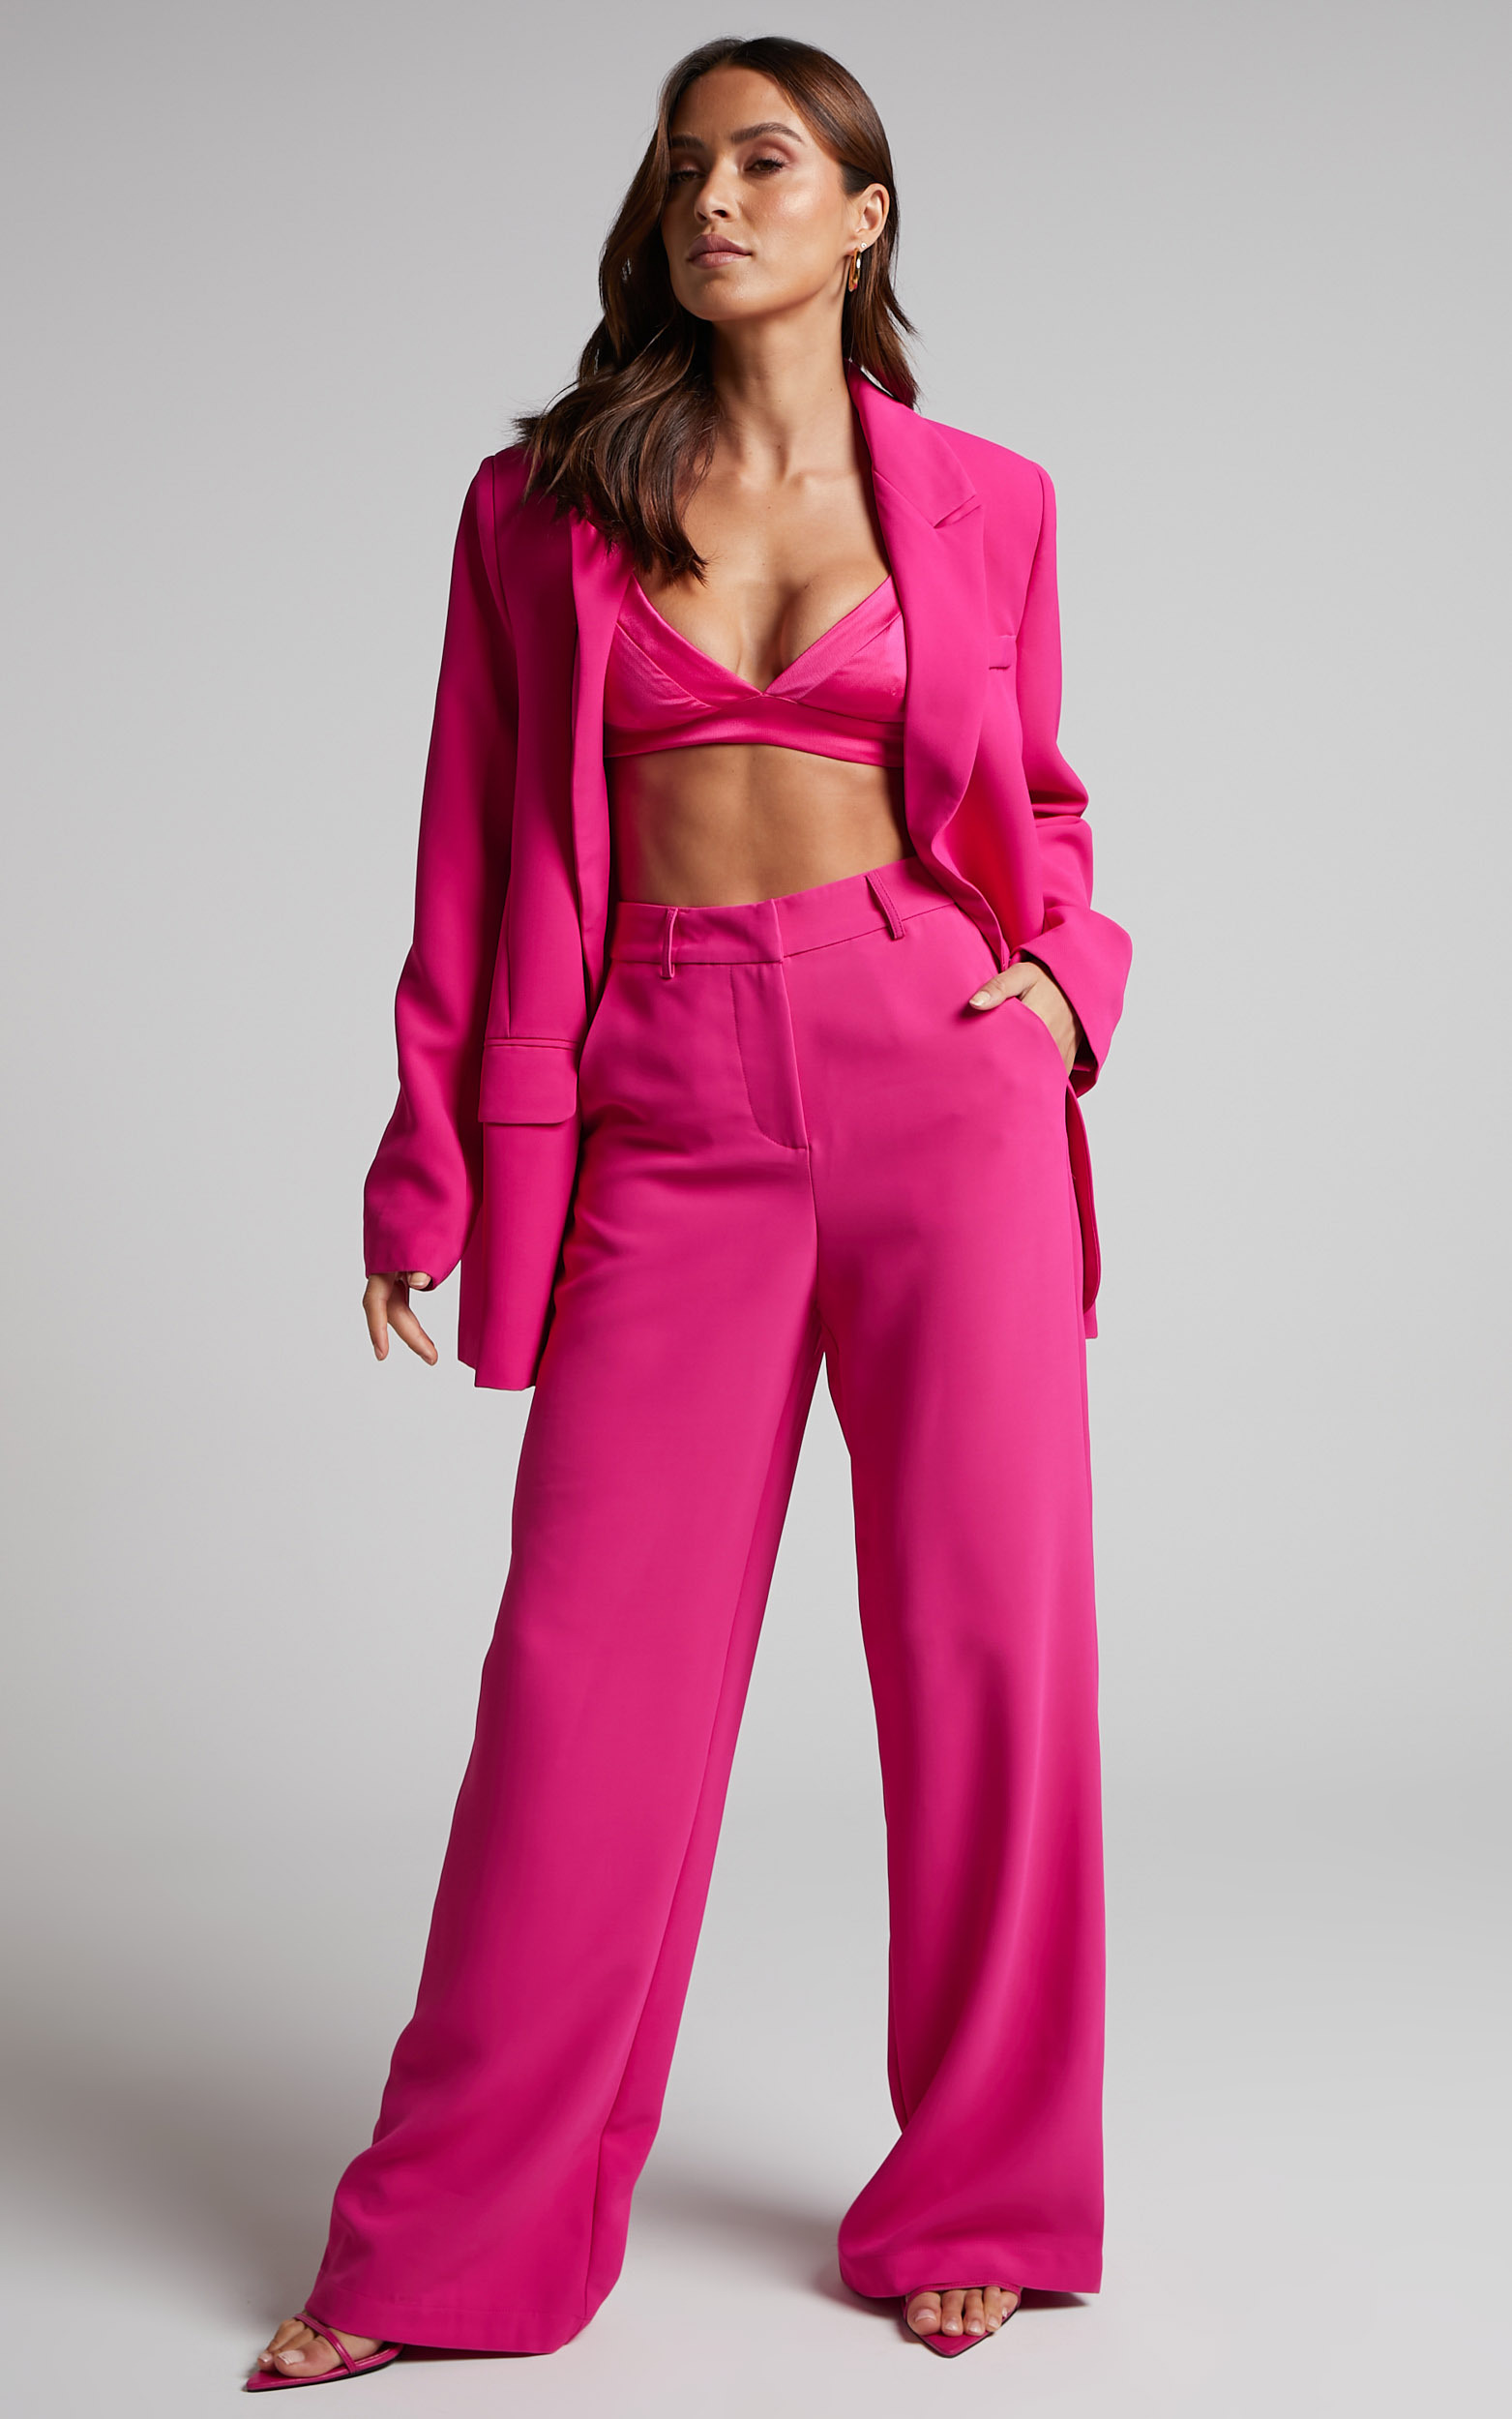 Bonnie Tailored Wide Leg Pants in Pink - 04, PNK1, hi-res image number null